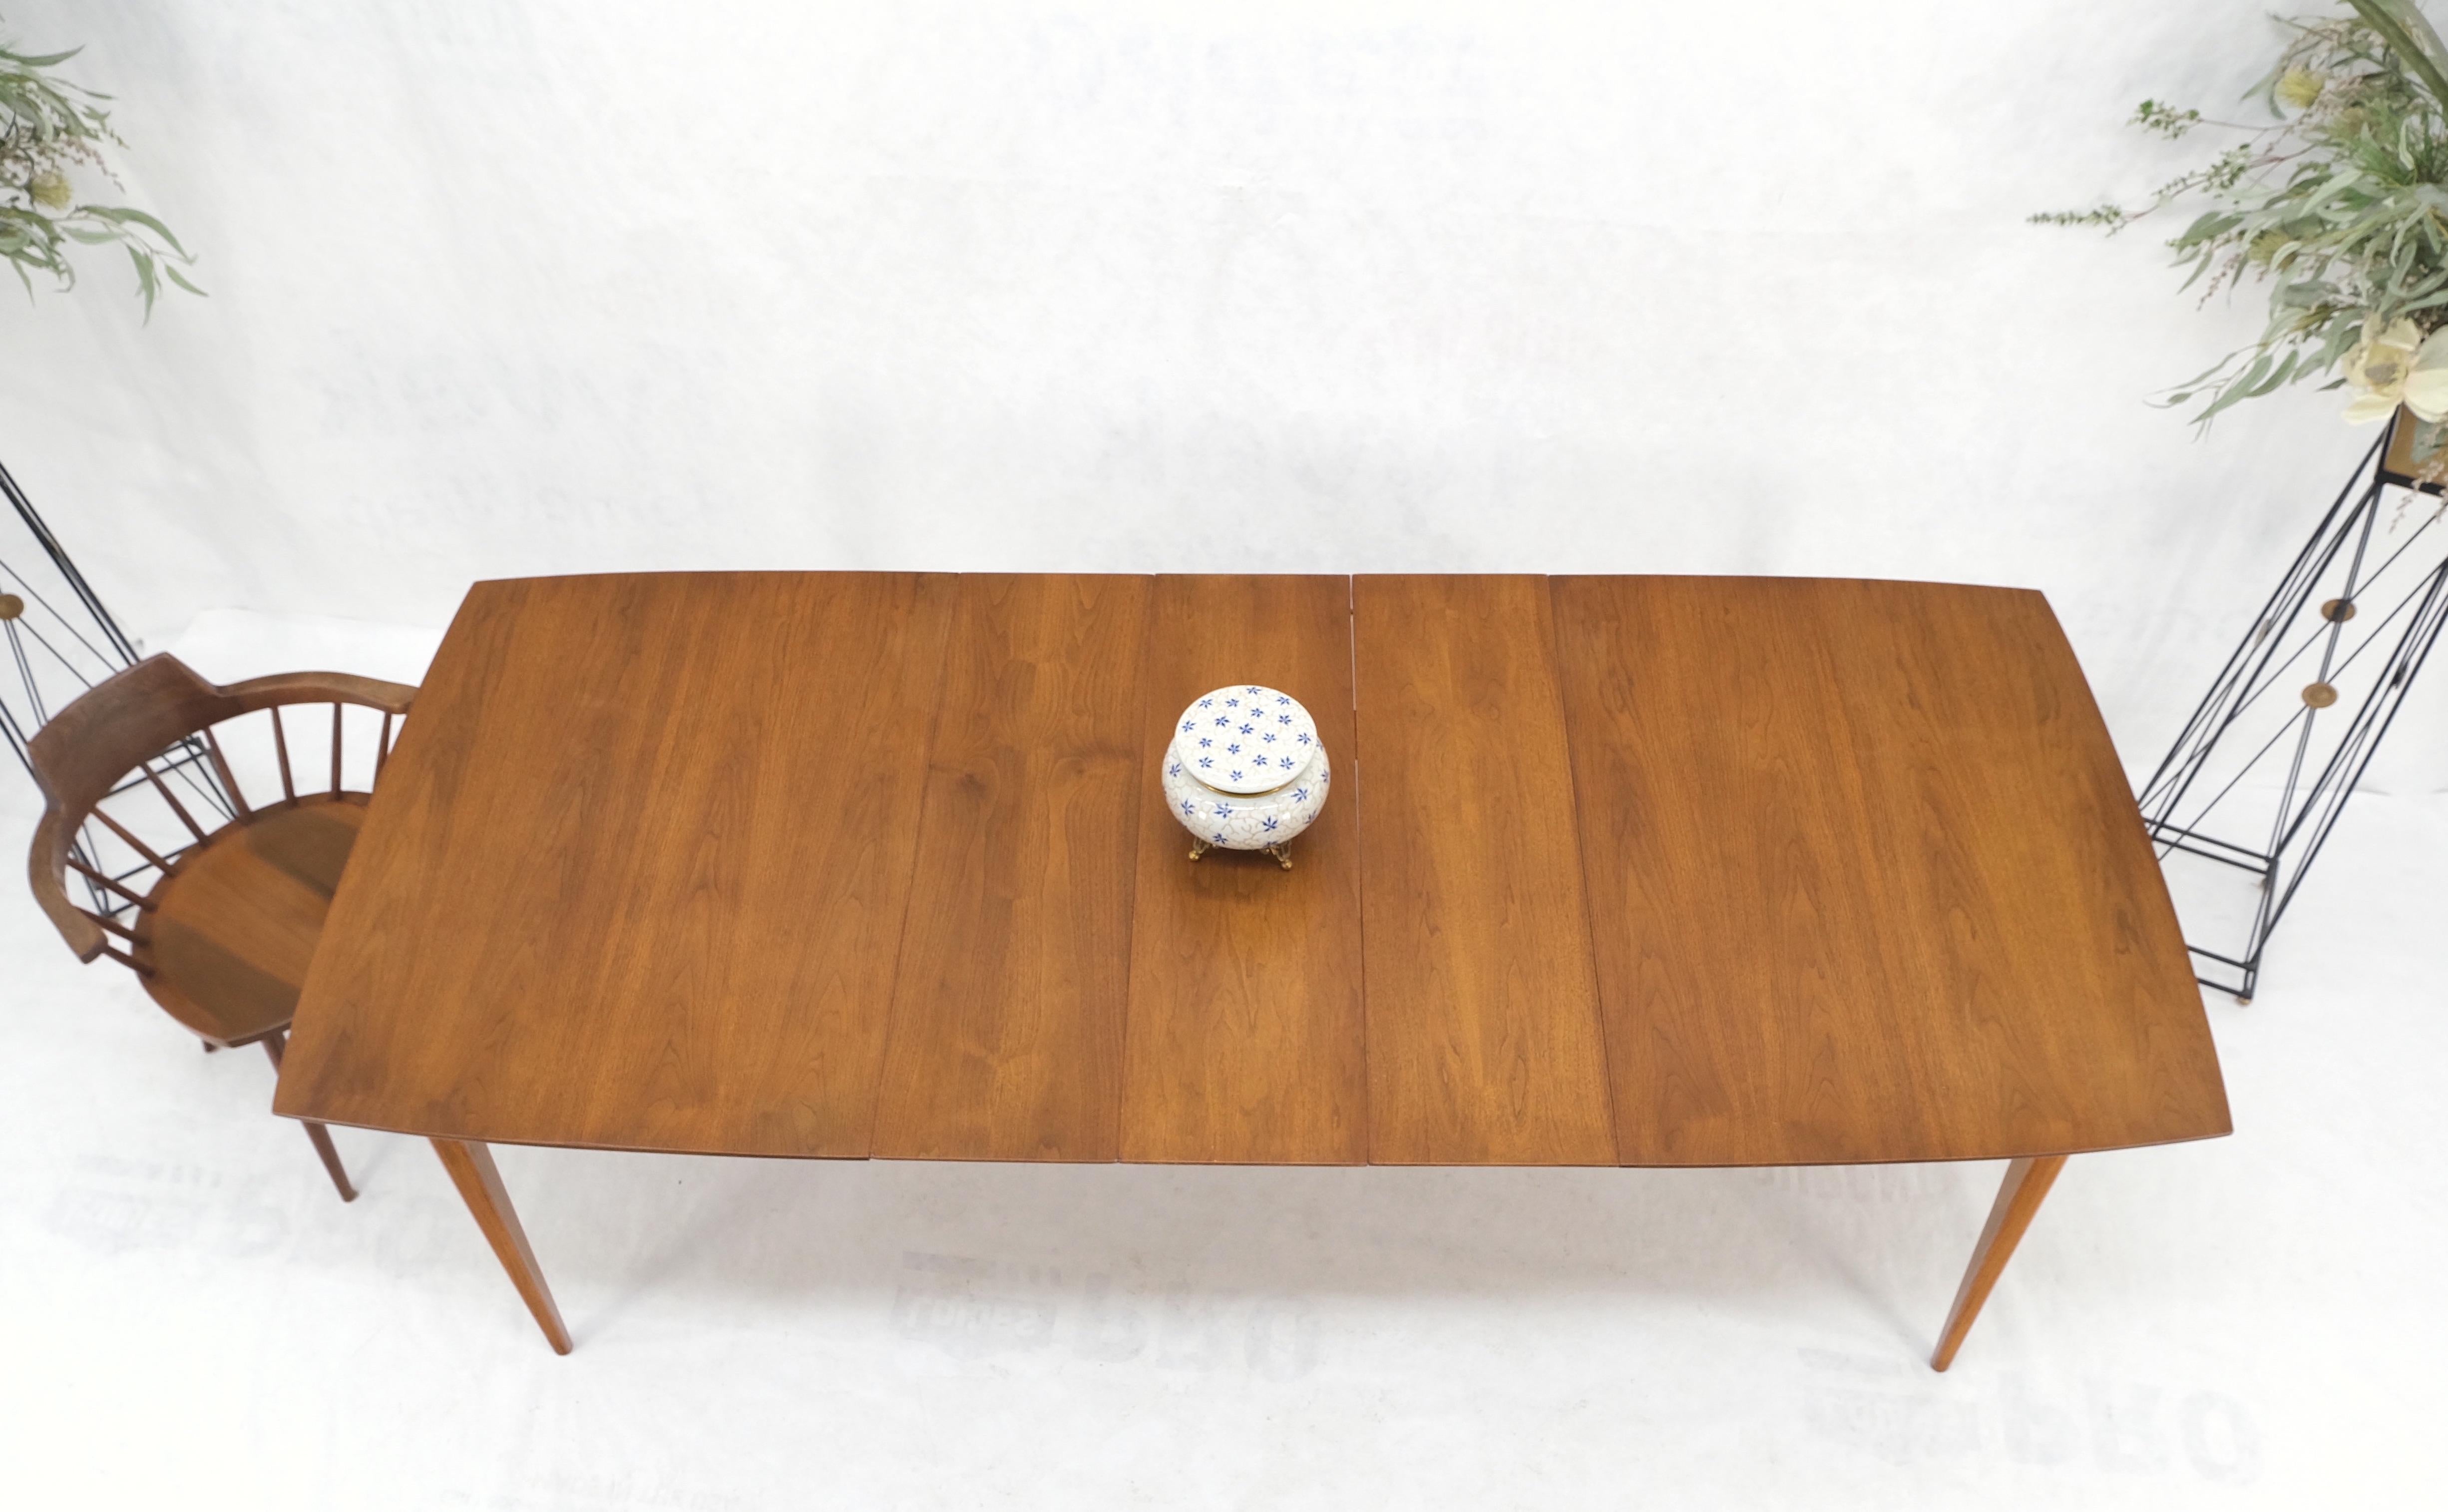 20th Century Light Walnut American Mid-Century Modern Boat Shape Dining Table 3 Leaves Mint! For Sale